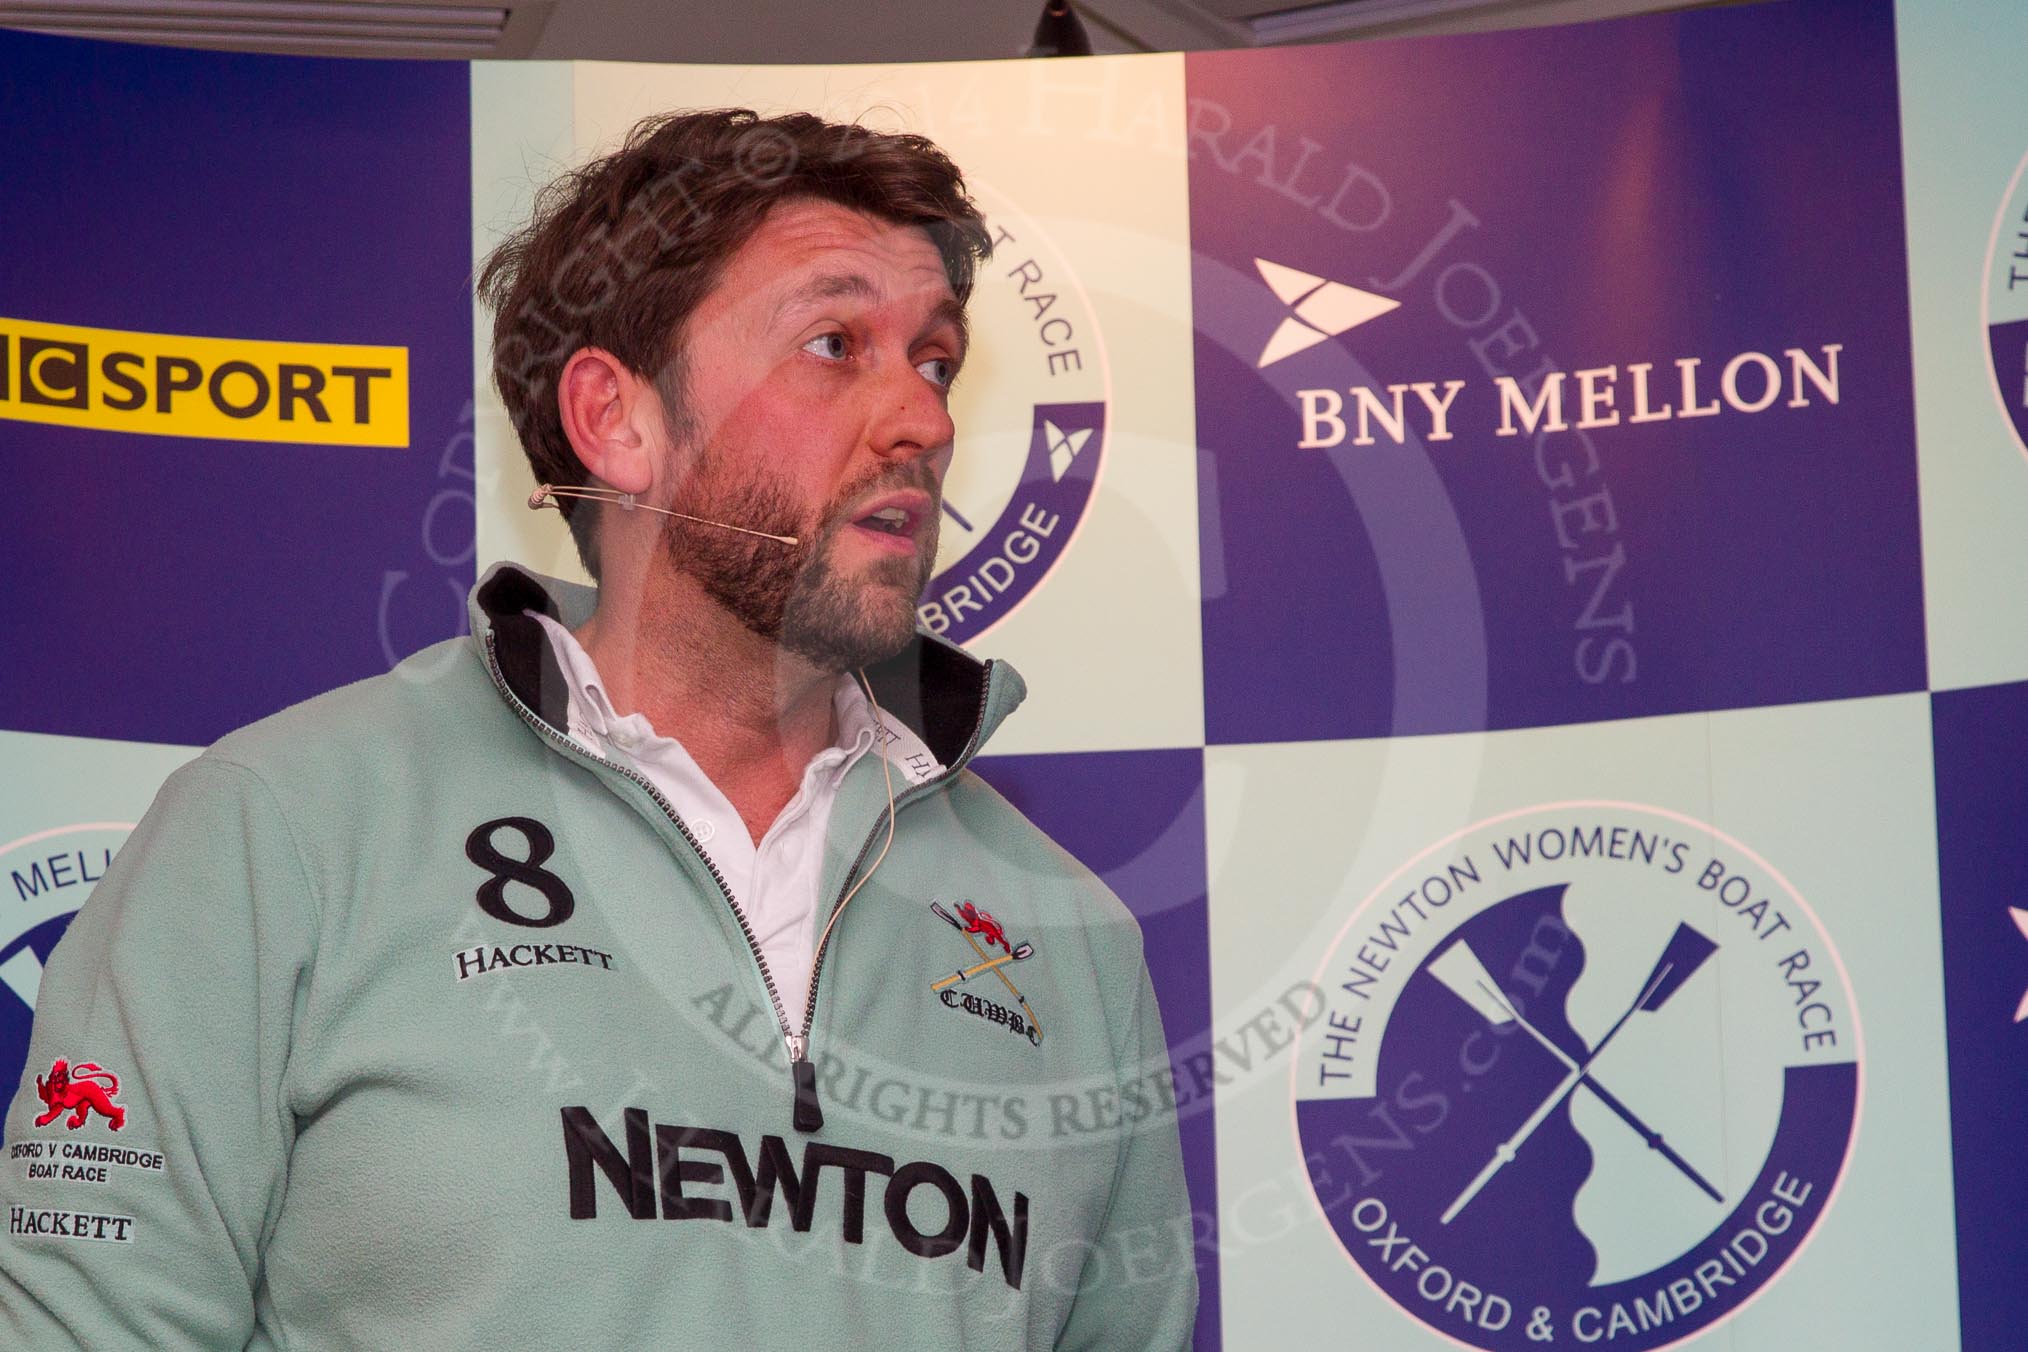 The Boat Race season 2014 - Crew Announcement and Weigh In: The 2014 Women's Boat Race coaches: Rob Baker, Cambridge..
BNY Mellon Centre,
London EC4V 4LA,
London,
United Kingdom,
on 10 March 2014 at 11:53, image #66